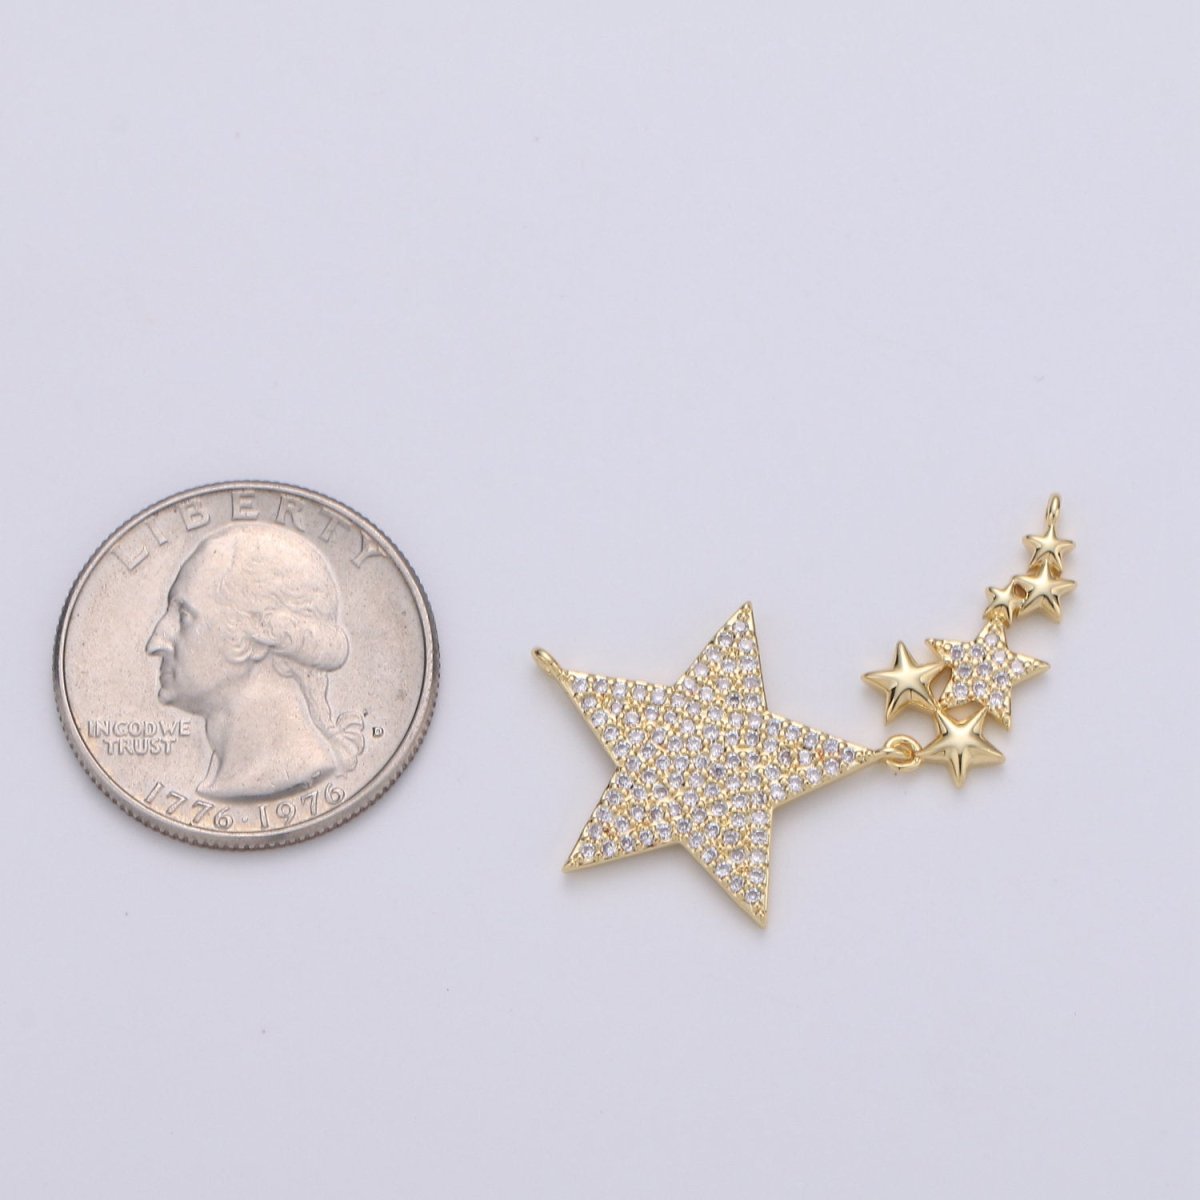 24k Gold Filled Micro Pave Star Charm, Twinkle little Star Pendant Charm, Gold Filled Charm, For DIY Necklace Component F-440 - DLUXCA